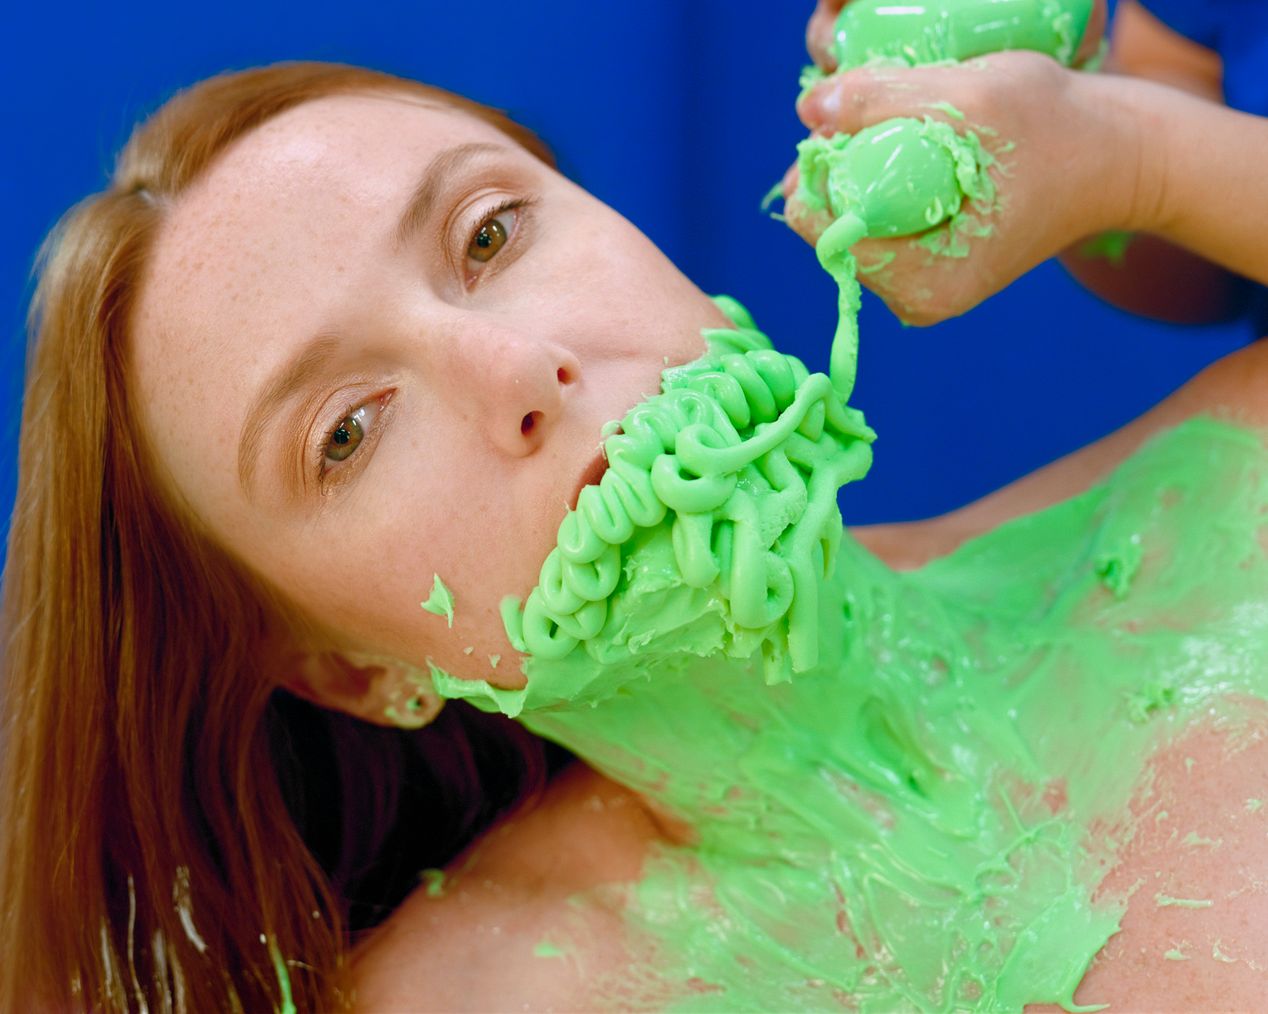 The artist is applying green silicone to the model's lips, art photography, Ilona Szwarc, contemporary Los Angeles artist.